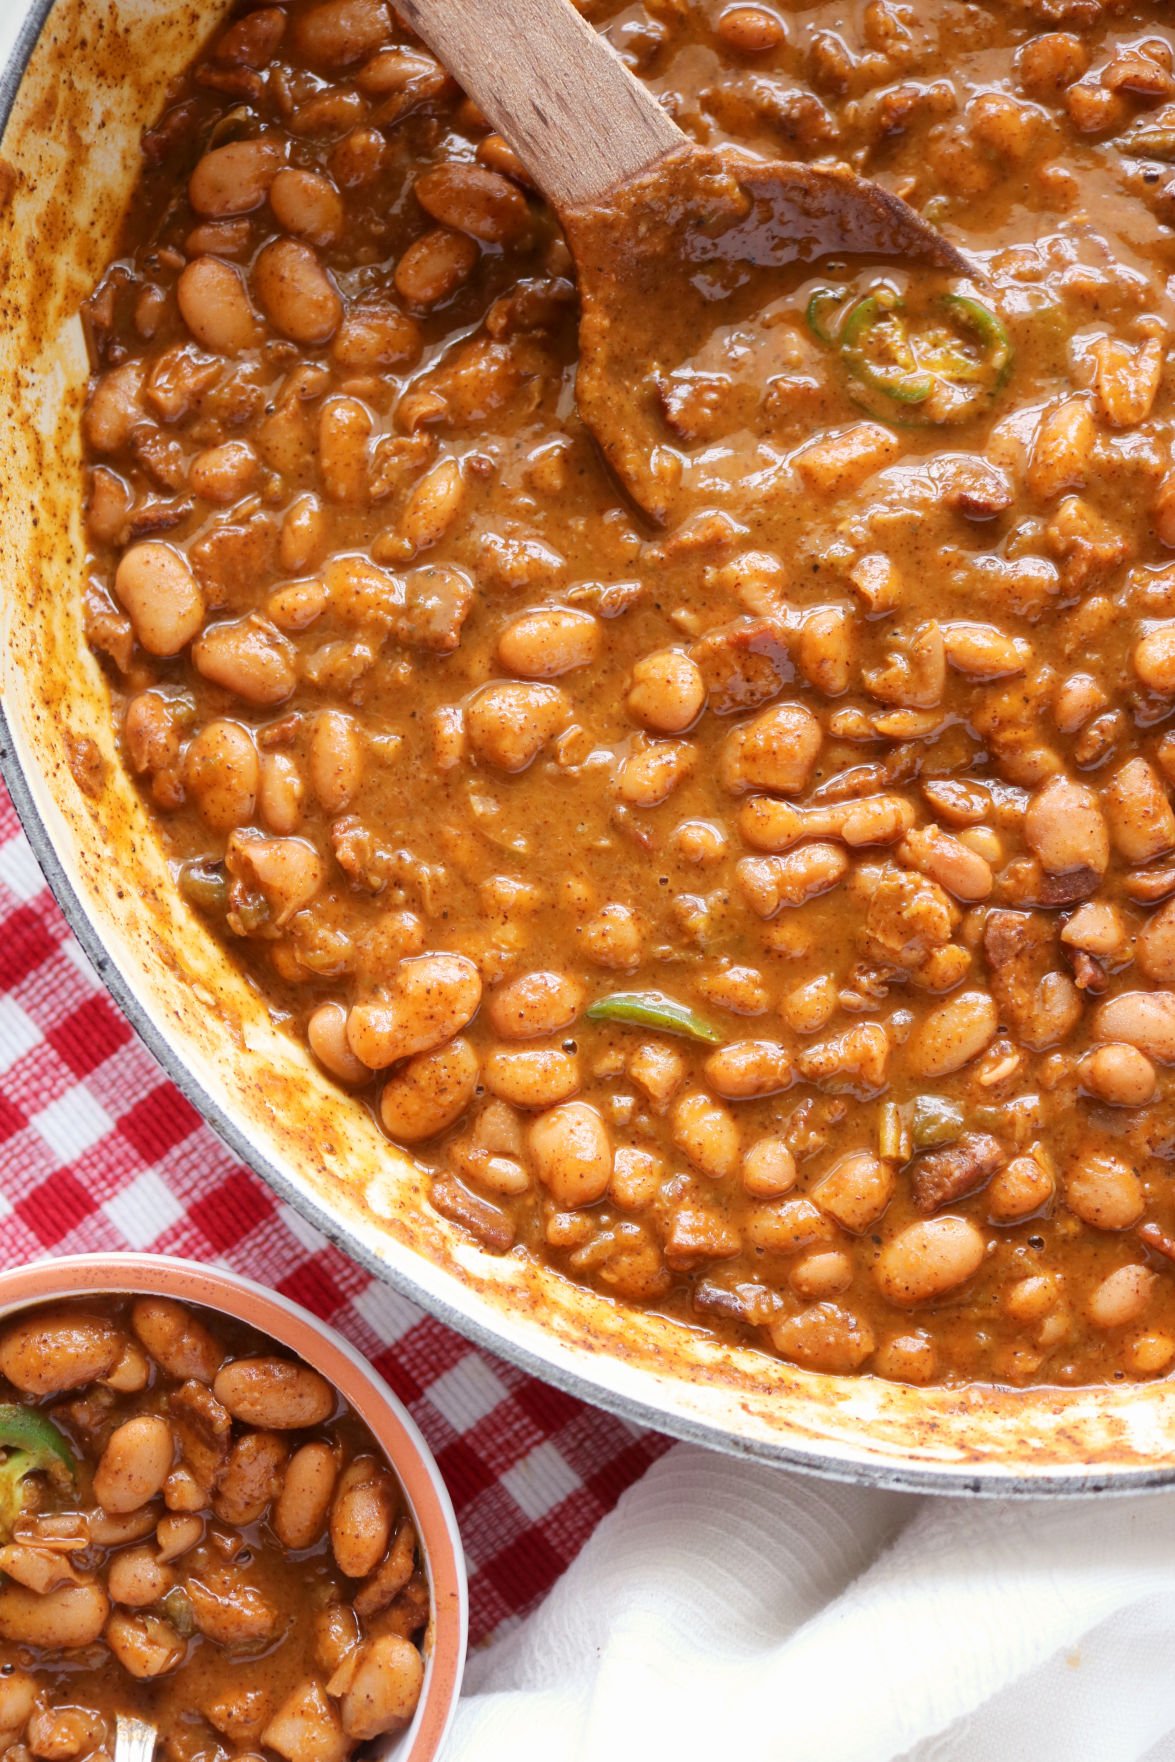 Homemade pinto beans done right need time | Kelly Anthony | theeagle.com